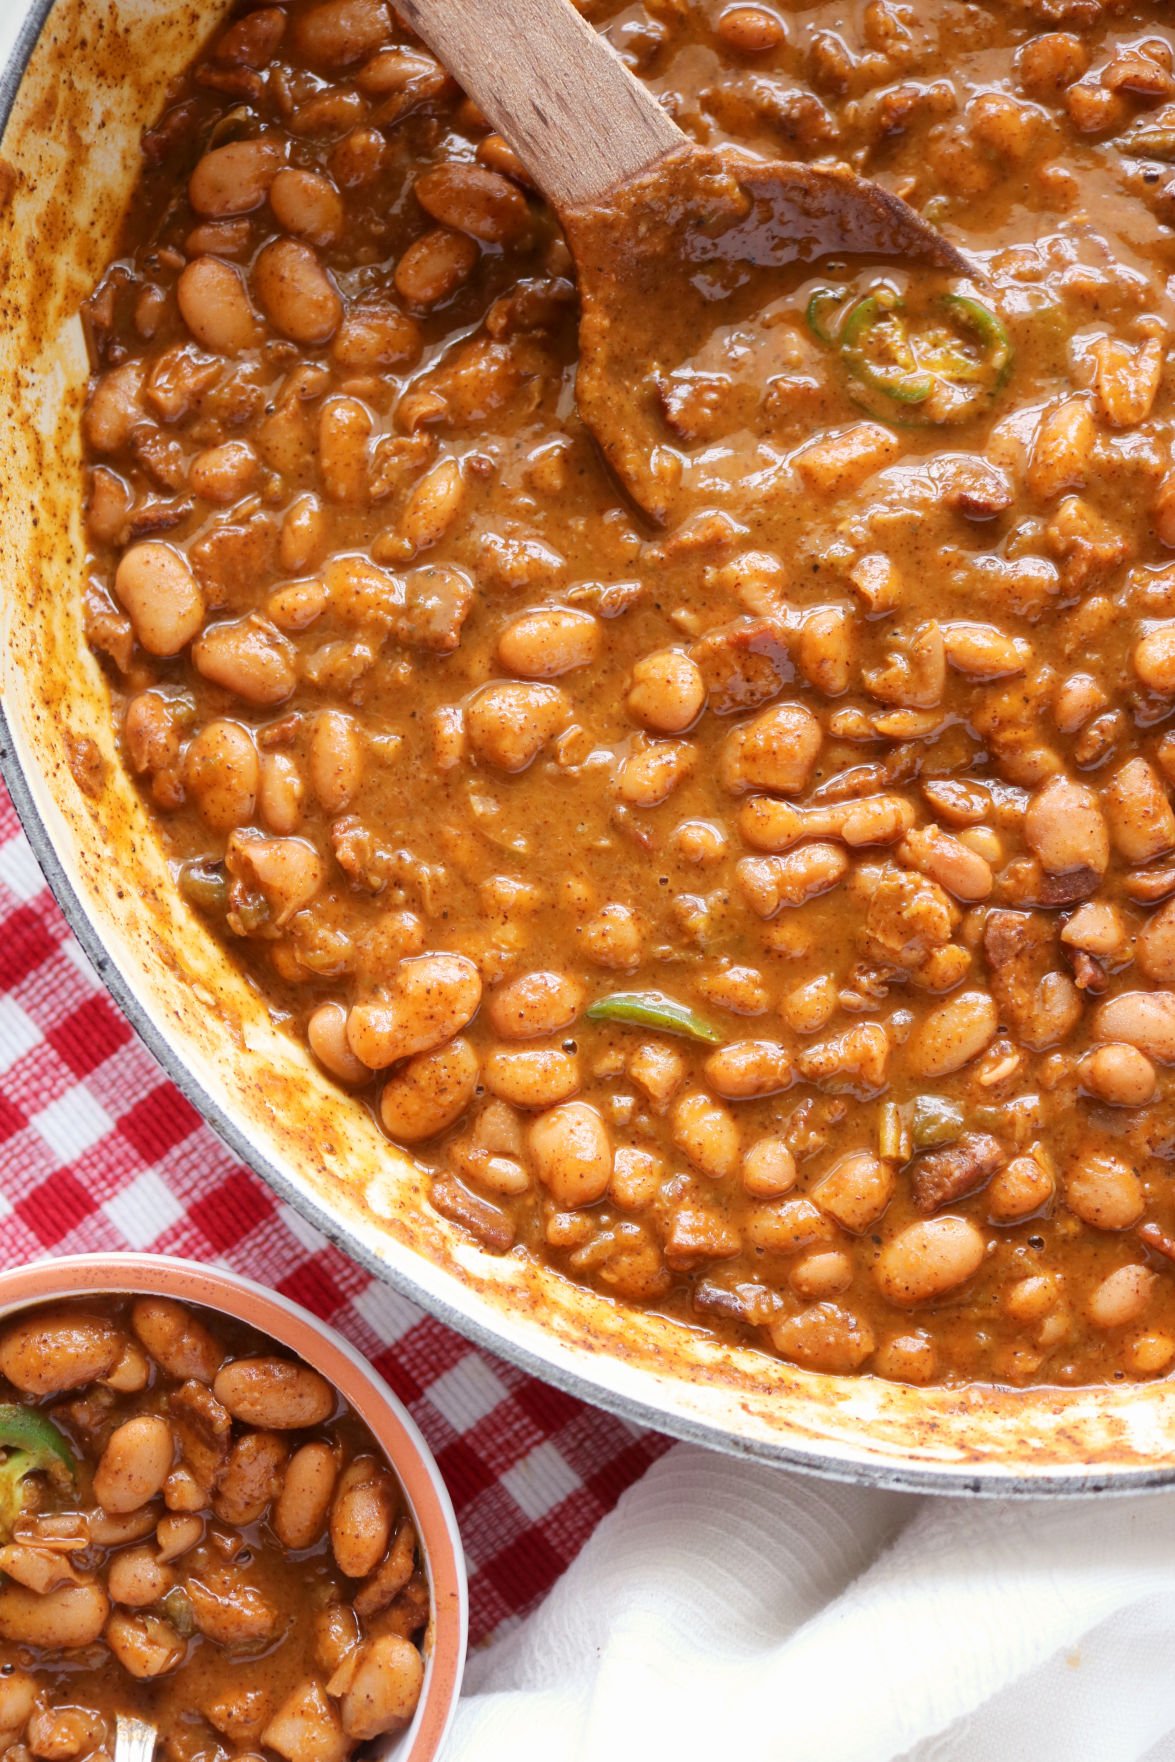 Homemade pinto beans done right need time | Kelly Anthony | theeagle.com